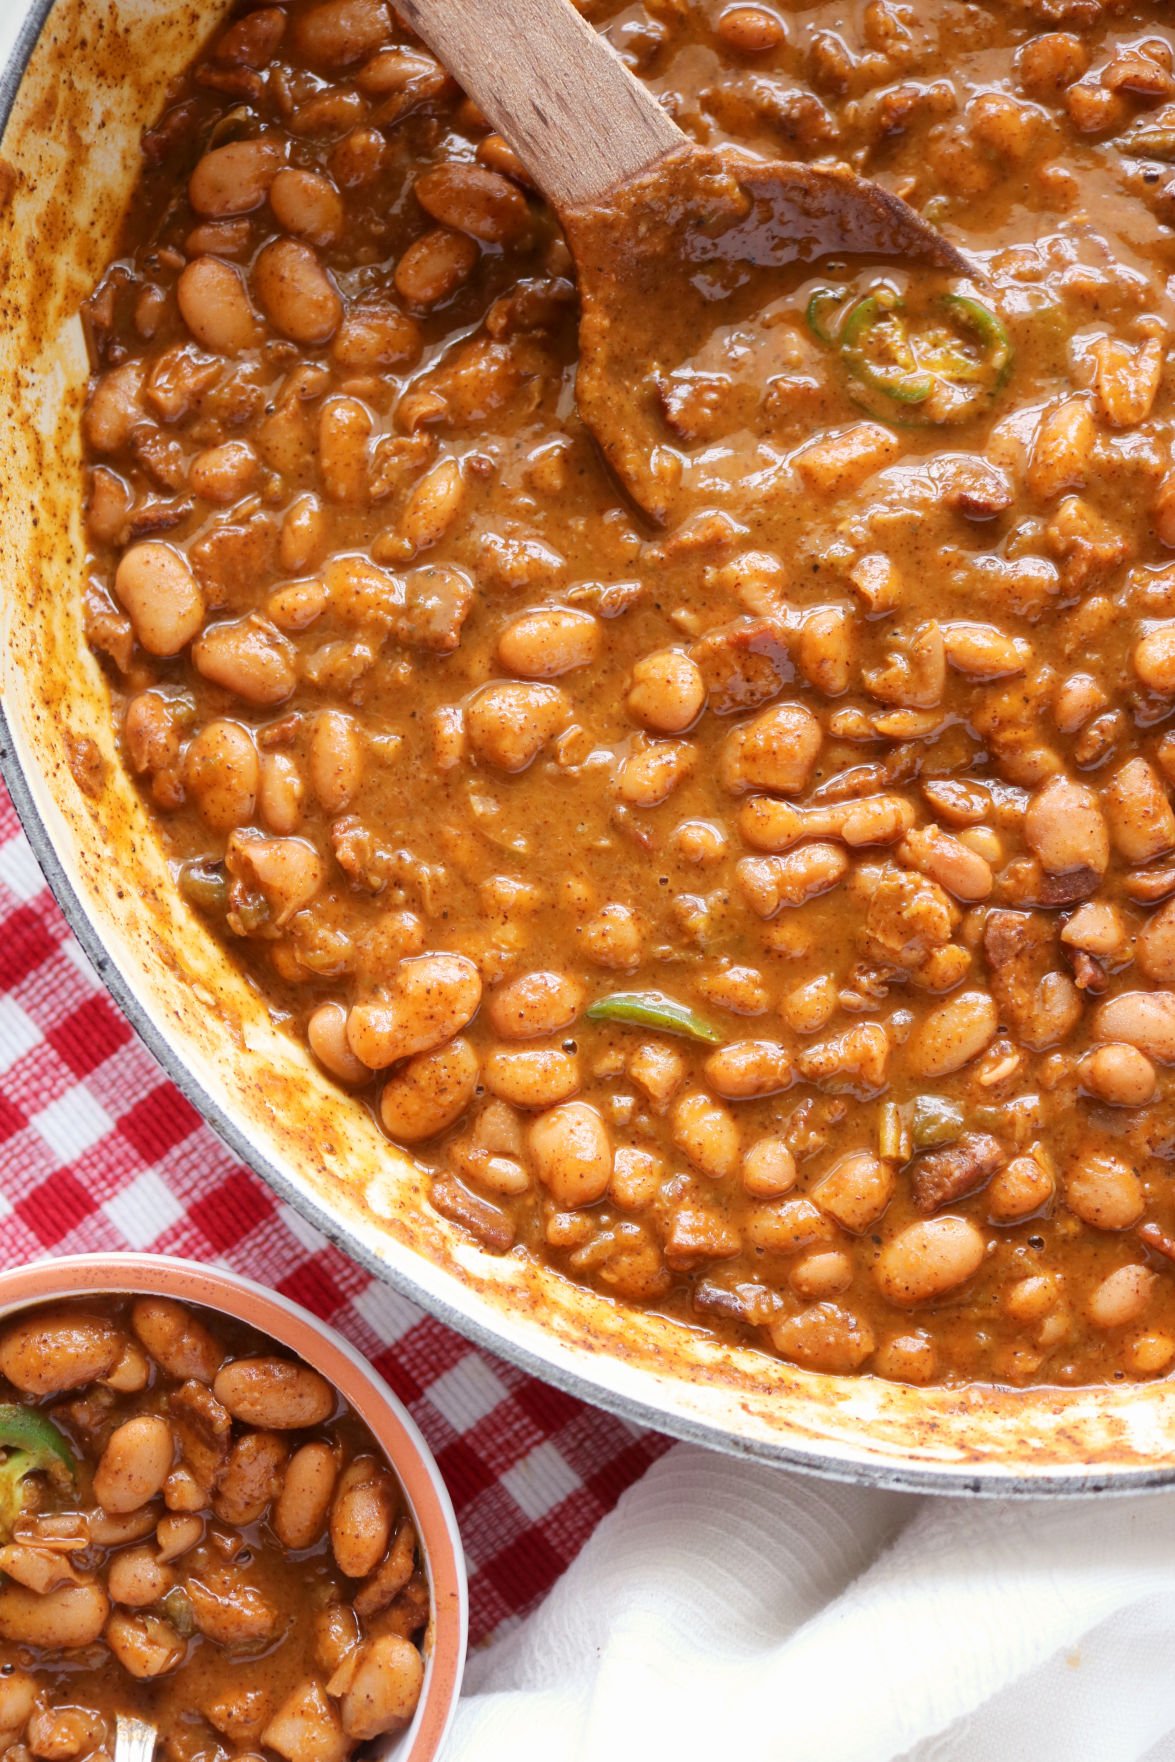 Homemade pinto beans done right need time | Kelly Anthony | theeagle.com